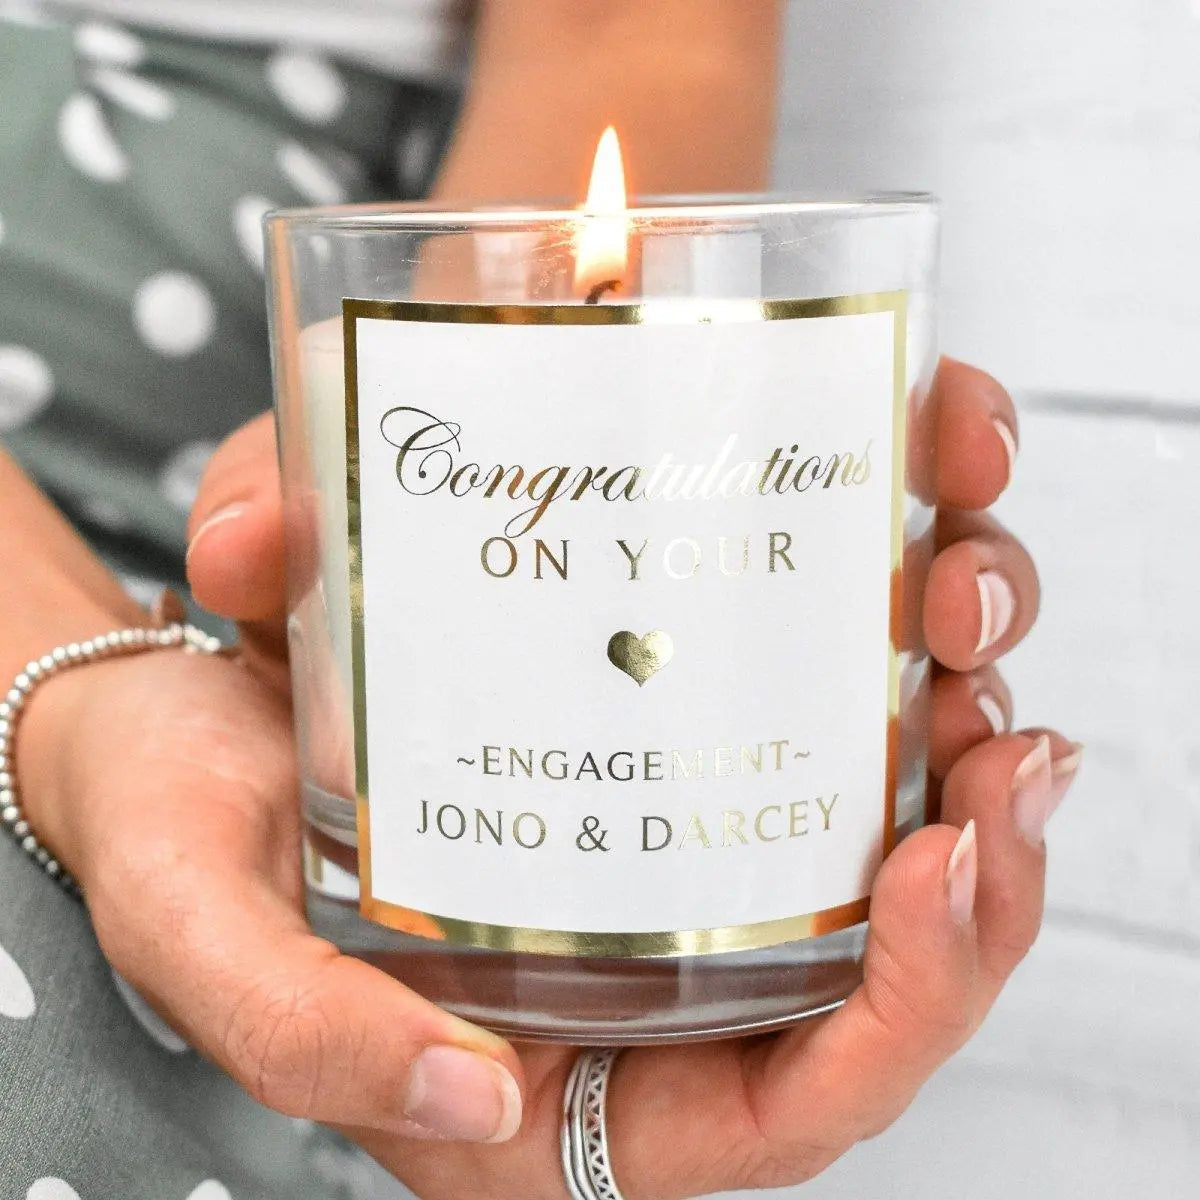 Candle Personalised Candle Congratulations Engagement Gift Candle in Jar Custom Candle Made In UK Personalised & Label White Candle - Amy Lucy